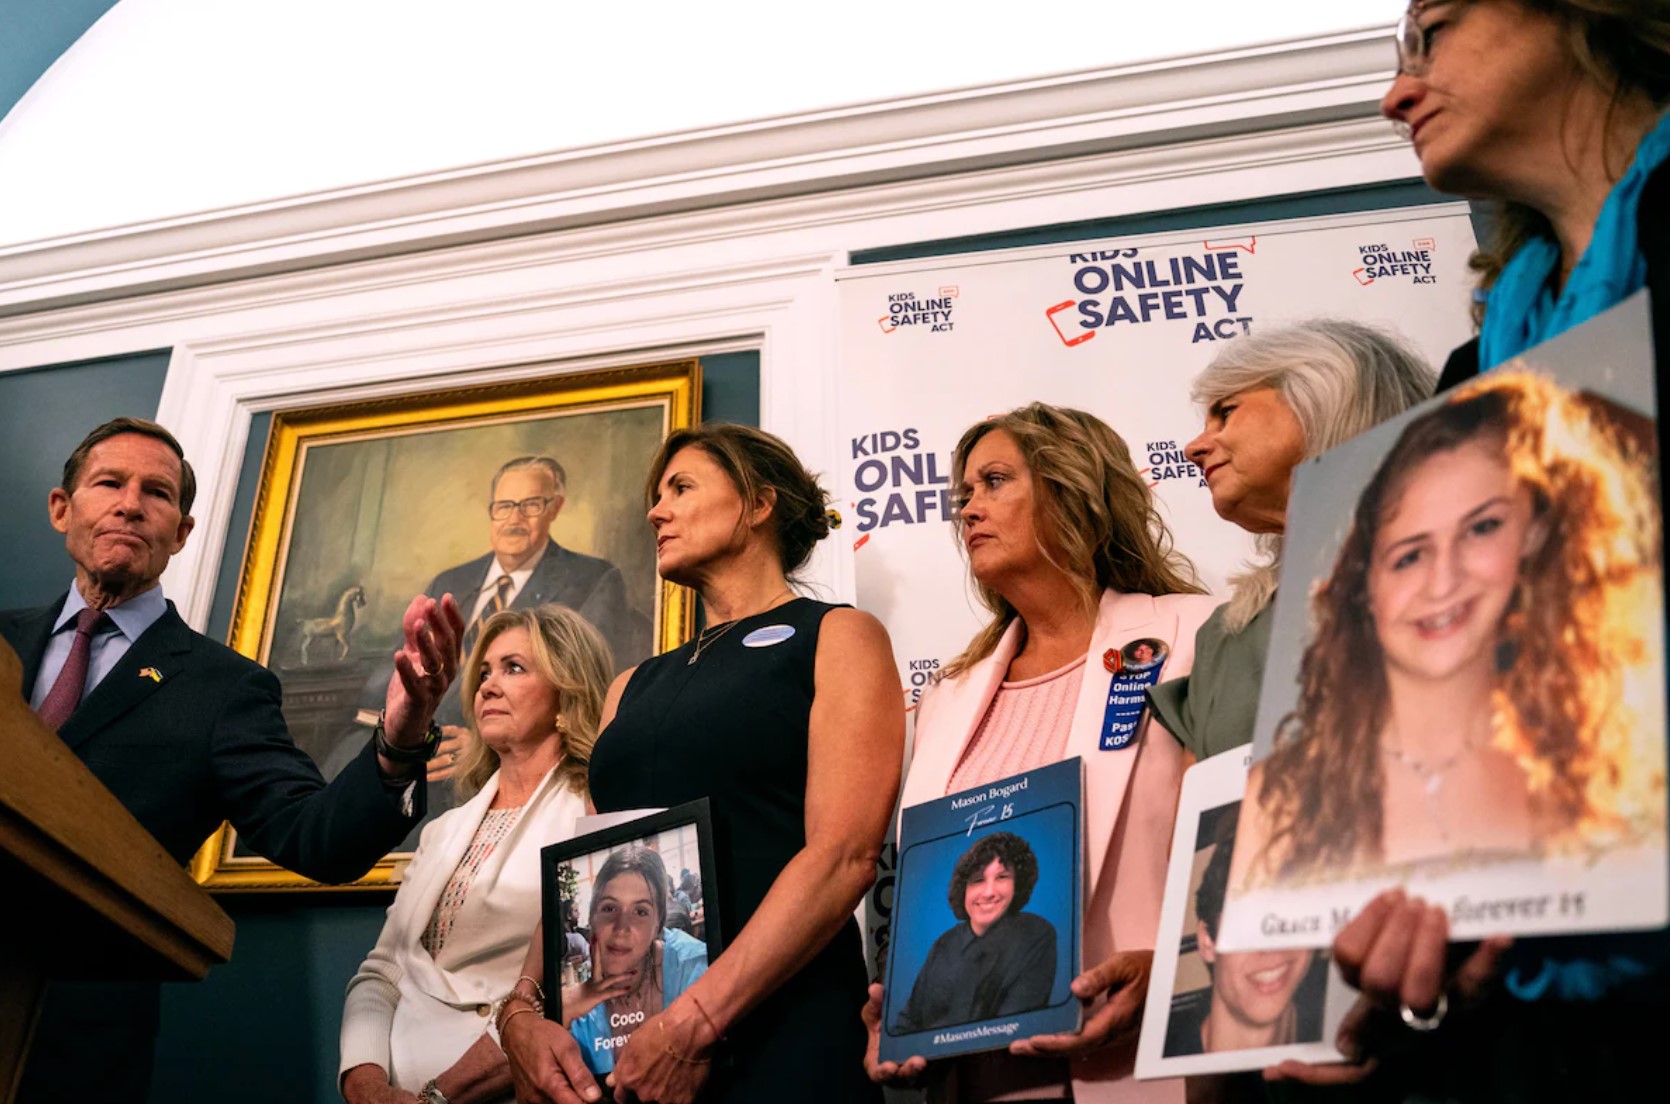 Sens. Richard Blumenthal (D-Conn.) and Marsha Blackburn (R-Tenn.) speak alongside families of victims of online abuse at a news conference on Capitol Hill for the Kids Online Safety Act on Thursday. (Kent Nishimura/Getty Images)